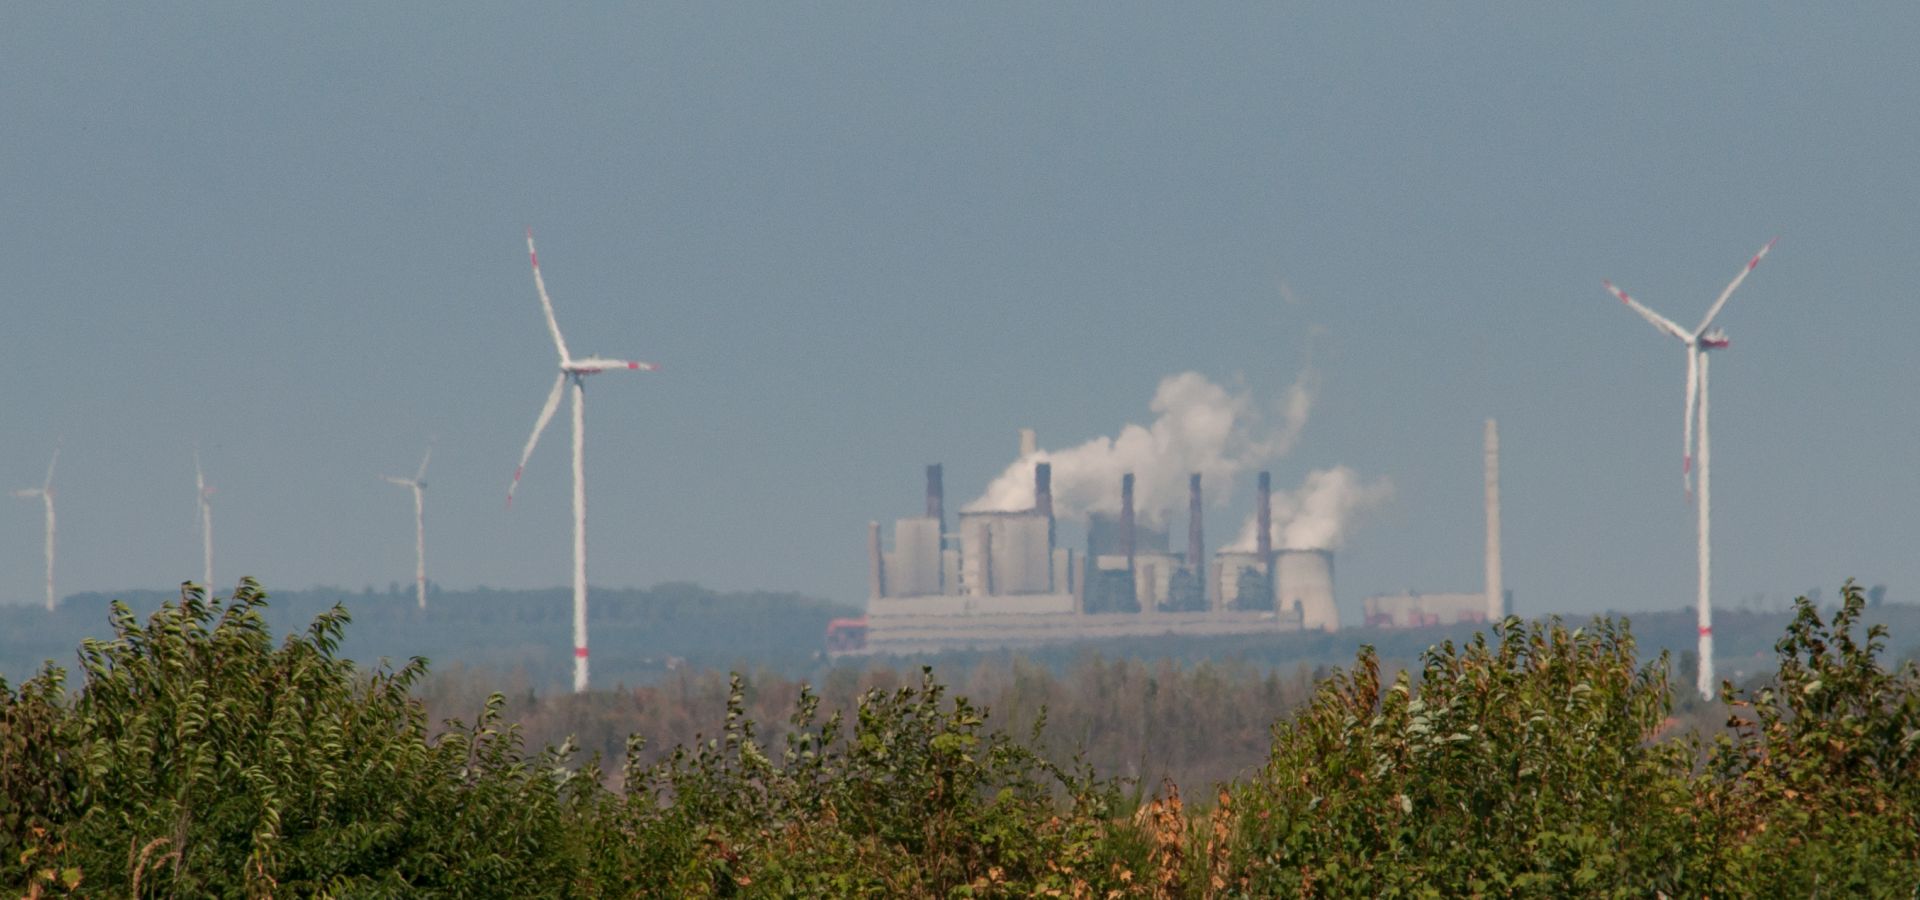 Hambach forest treetops with coal plant and wind turbines in background